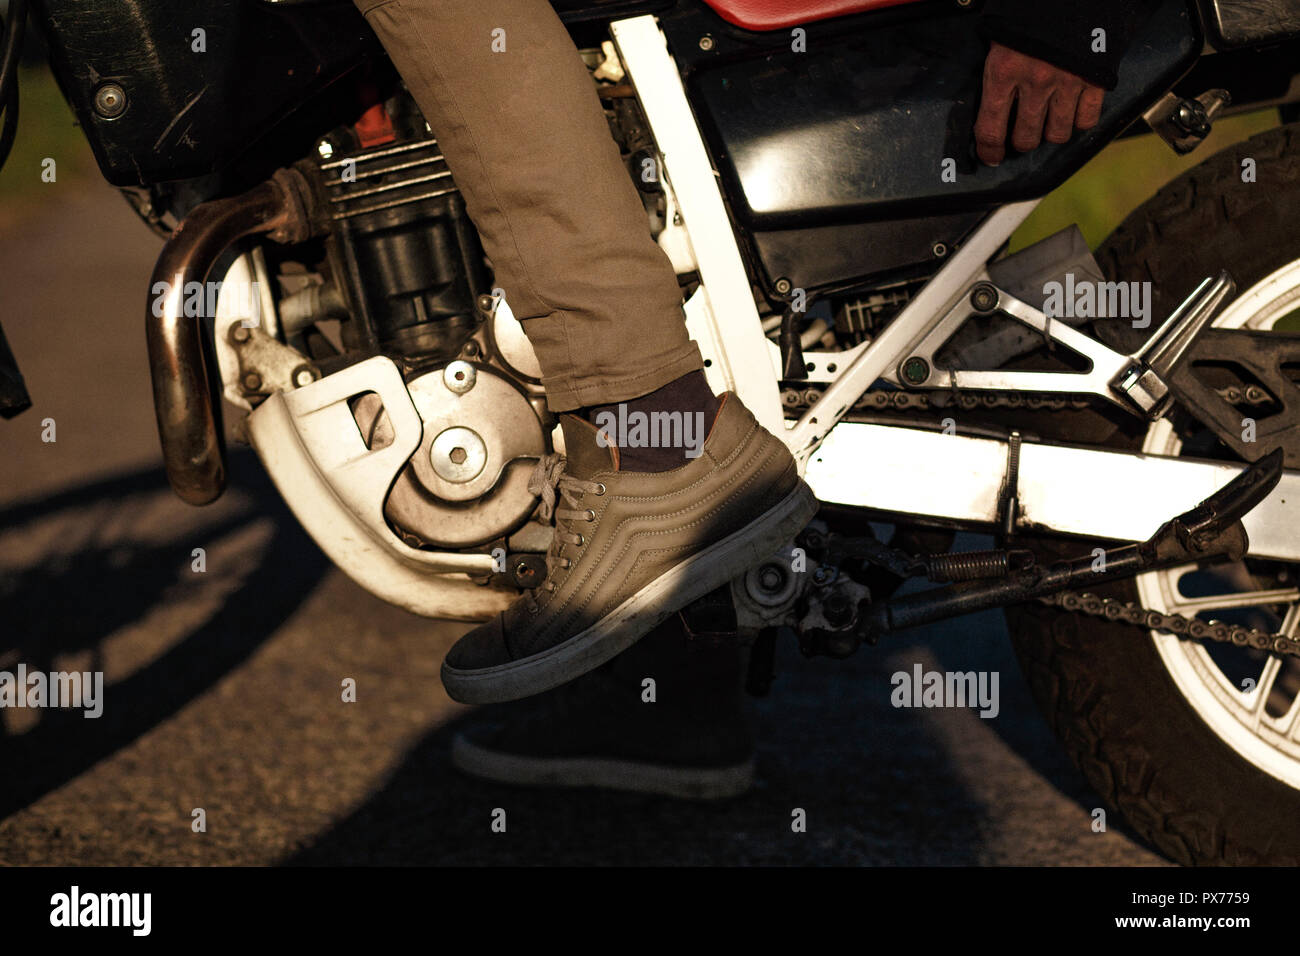 Close view of the legs in shoes on a motorbike Stock Photo